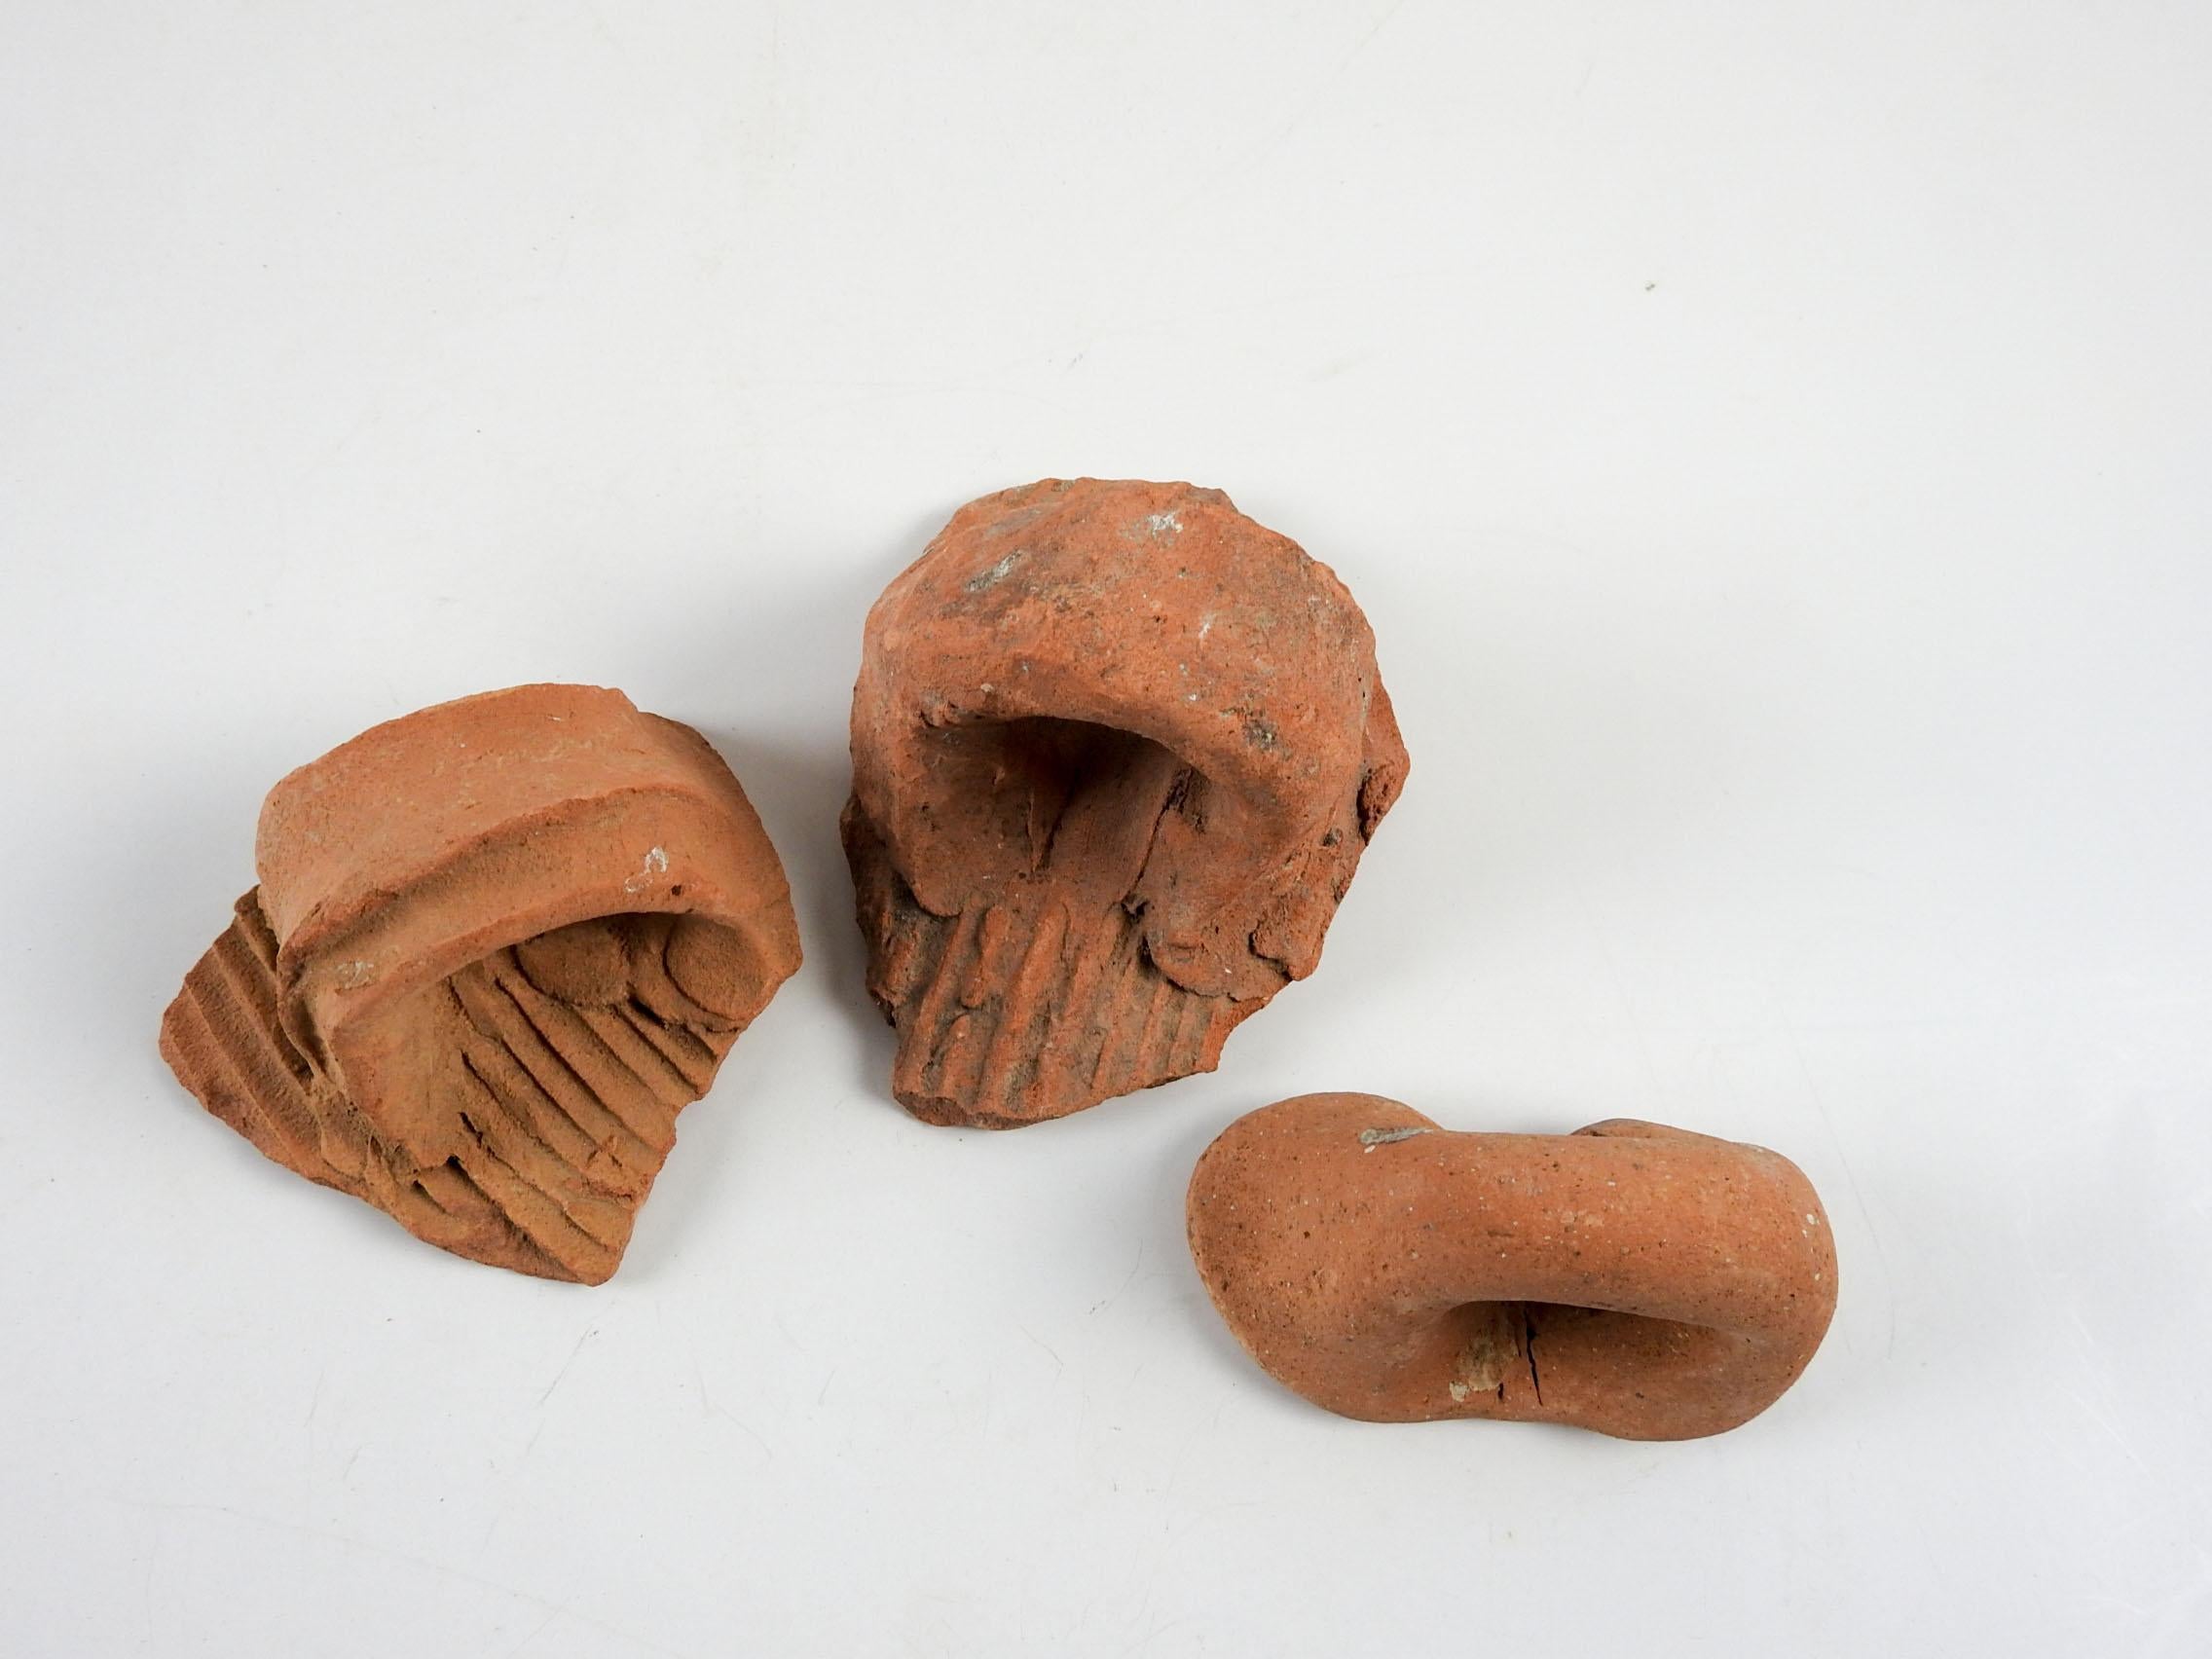 Group of 3 ancient Mediterranean terracotta pottery handle fragments . I have several sets of these, colors vary from brownish to reddish, size and overall wear will vary. Largest fragment is about 4